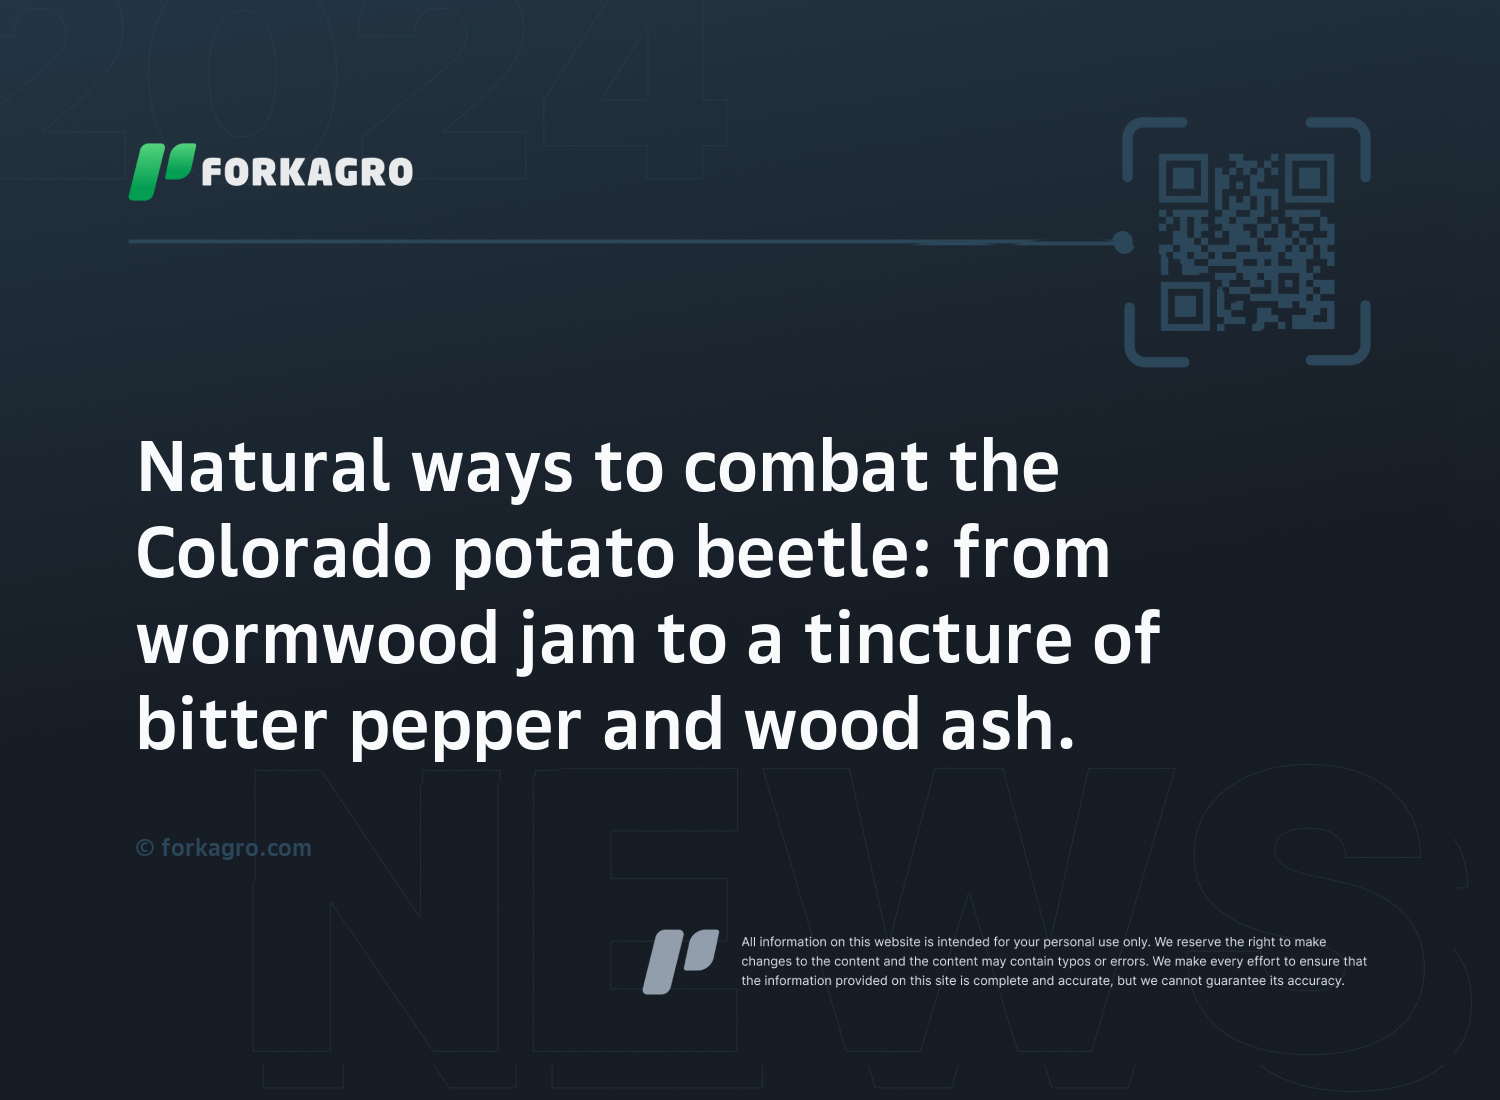 Natural ways to combat the Colorado potato beetle: from wormwood jam to a tincture of bitter pepper and wood ash.